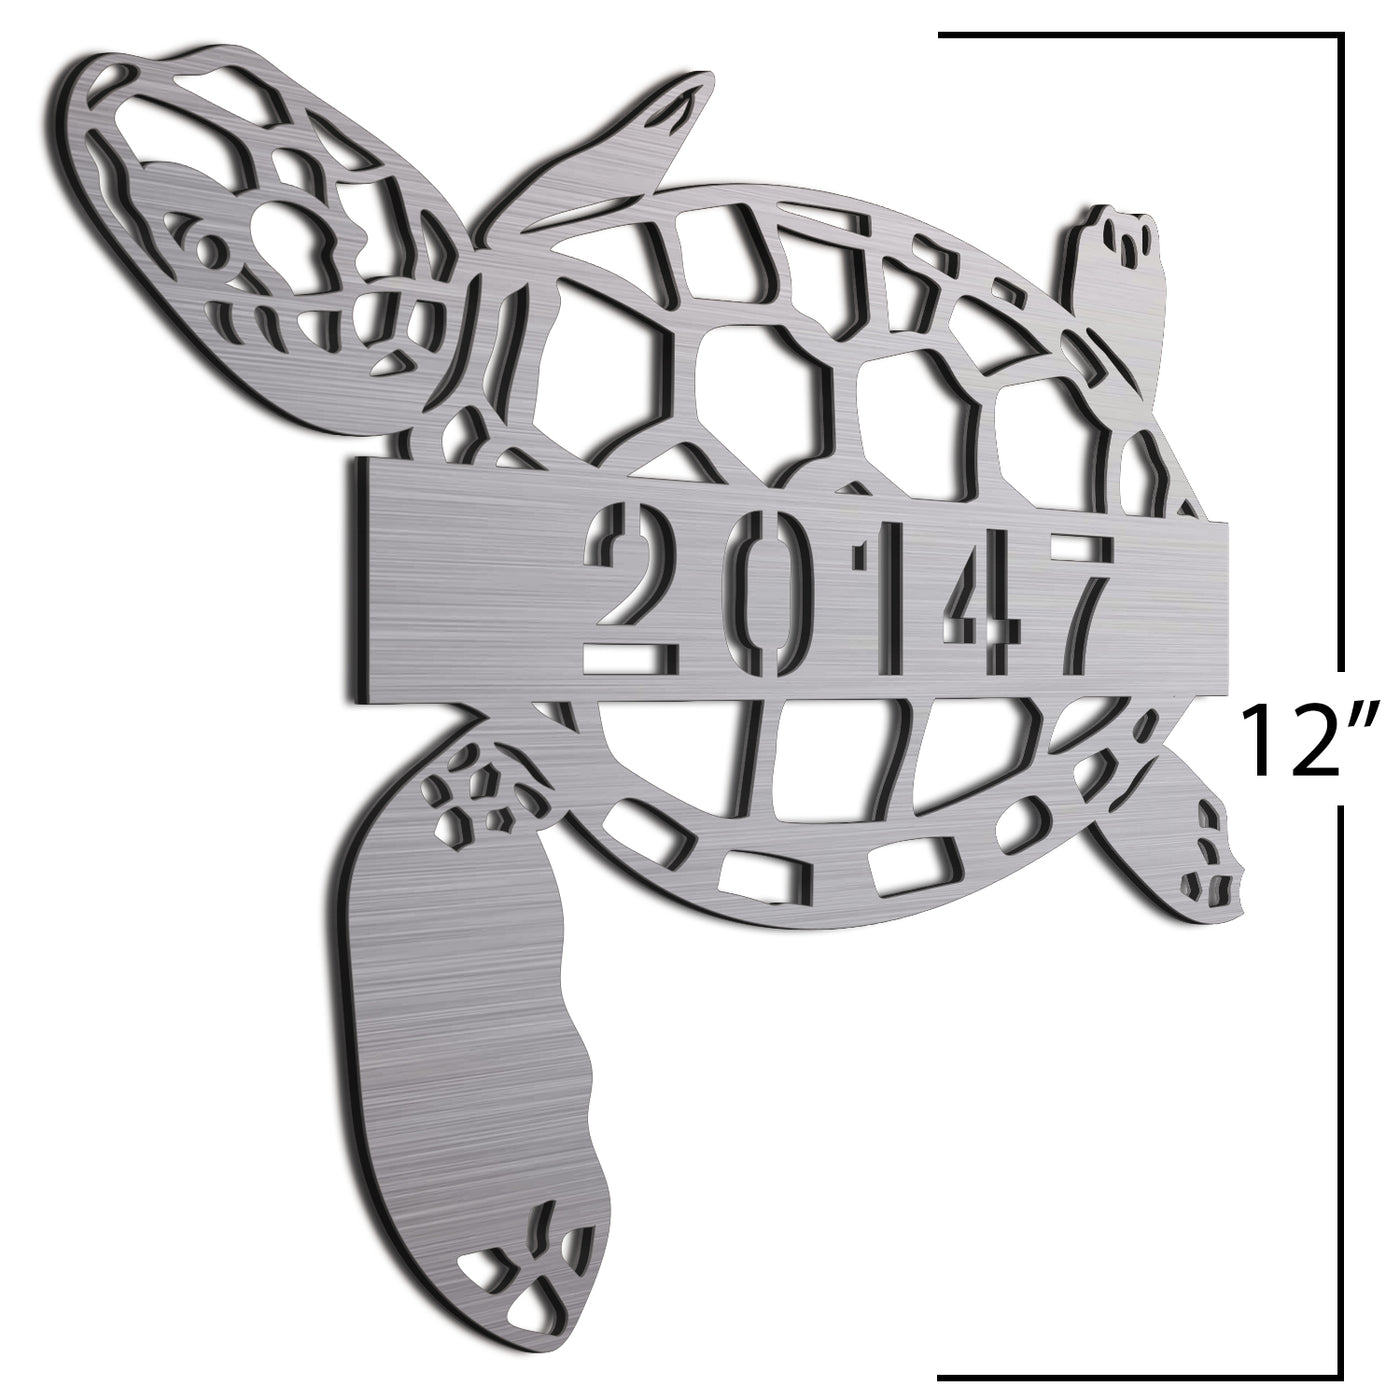 Address Number Sign Brush 12 Inches Sea Turtle